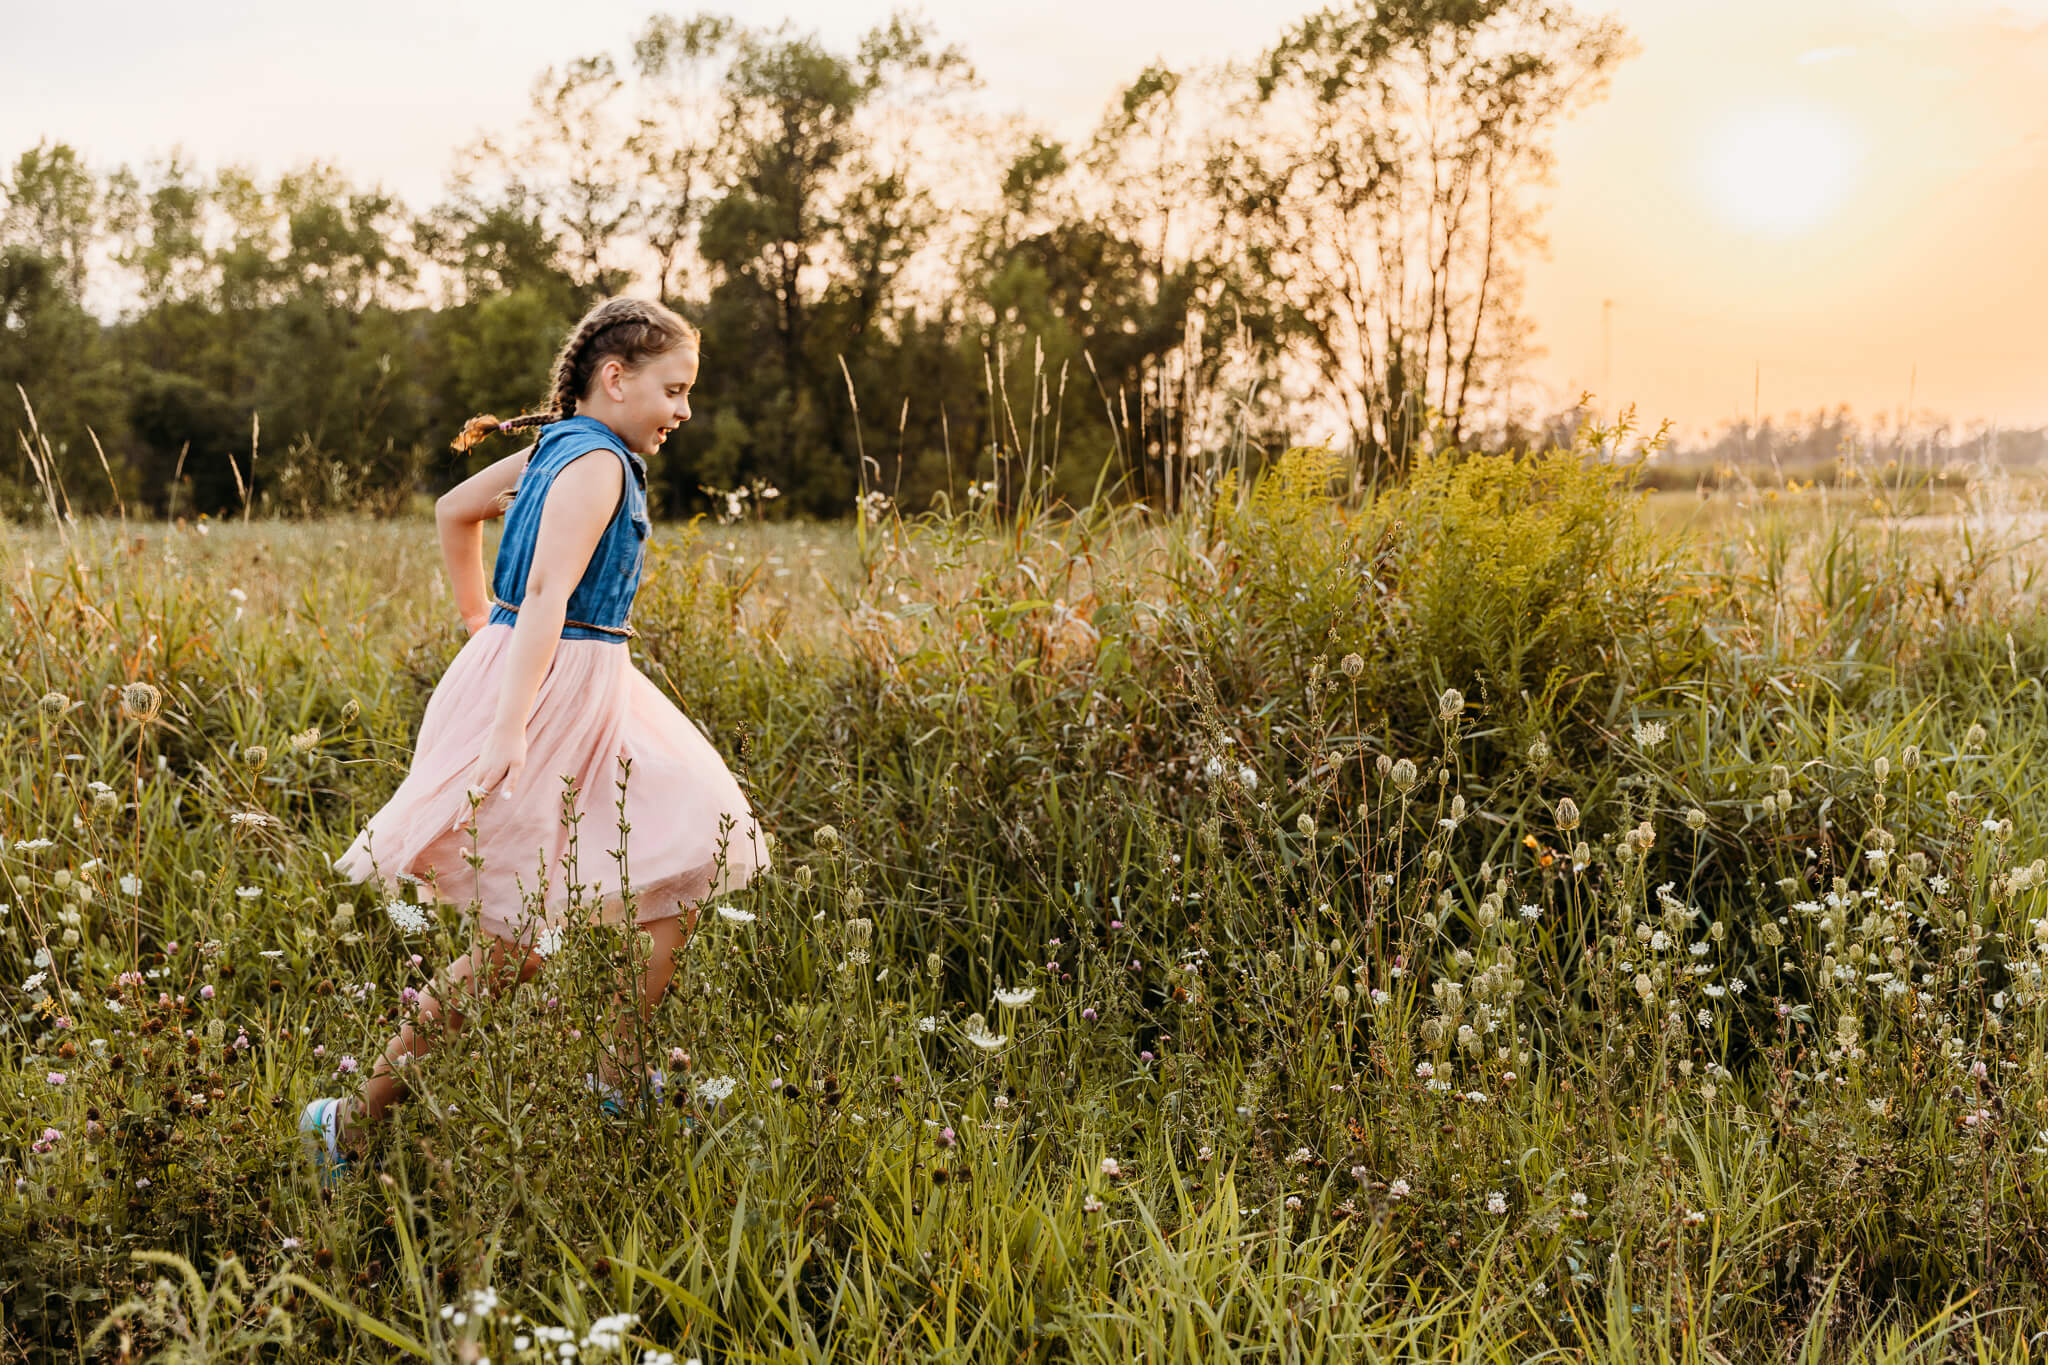 adorable little girl running through a grassy field during a photoshoot for a blog about thedacare pediatrics